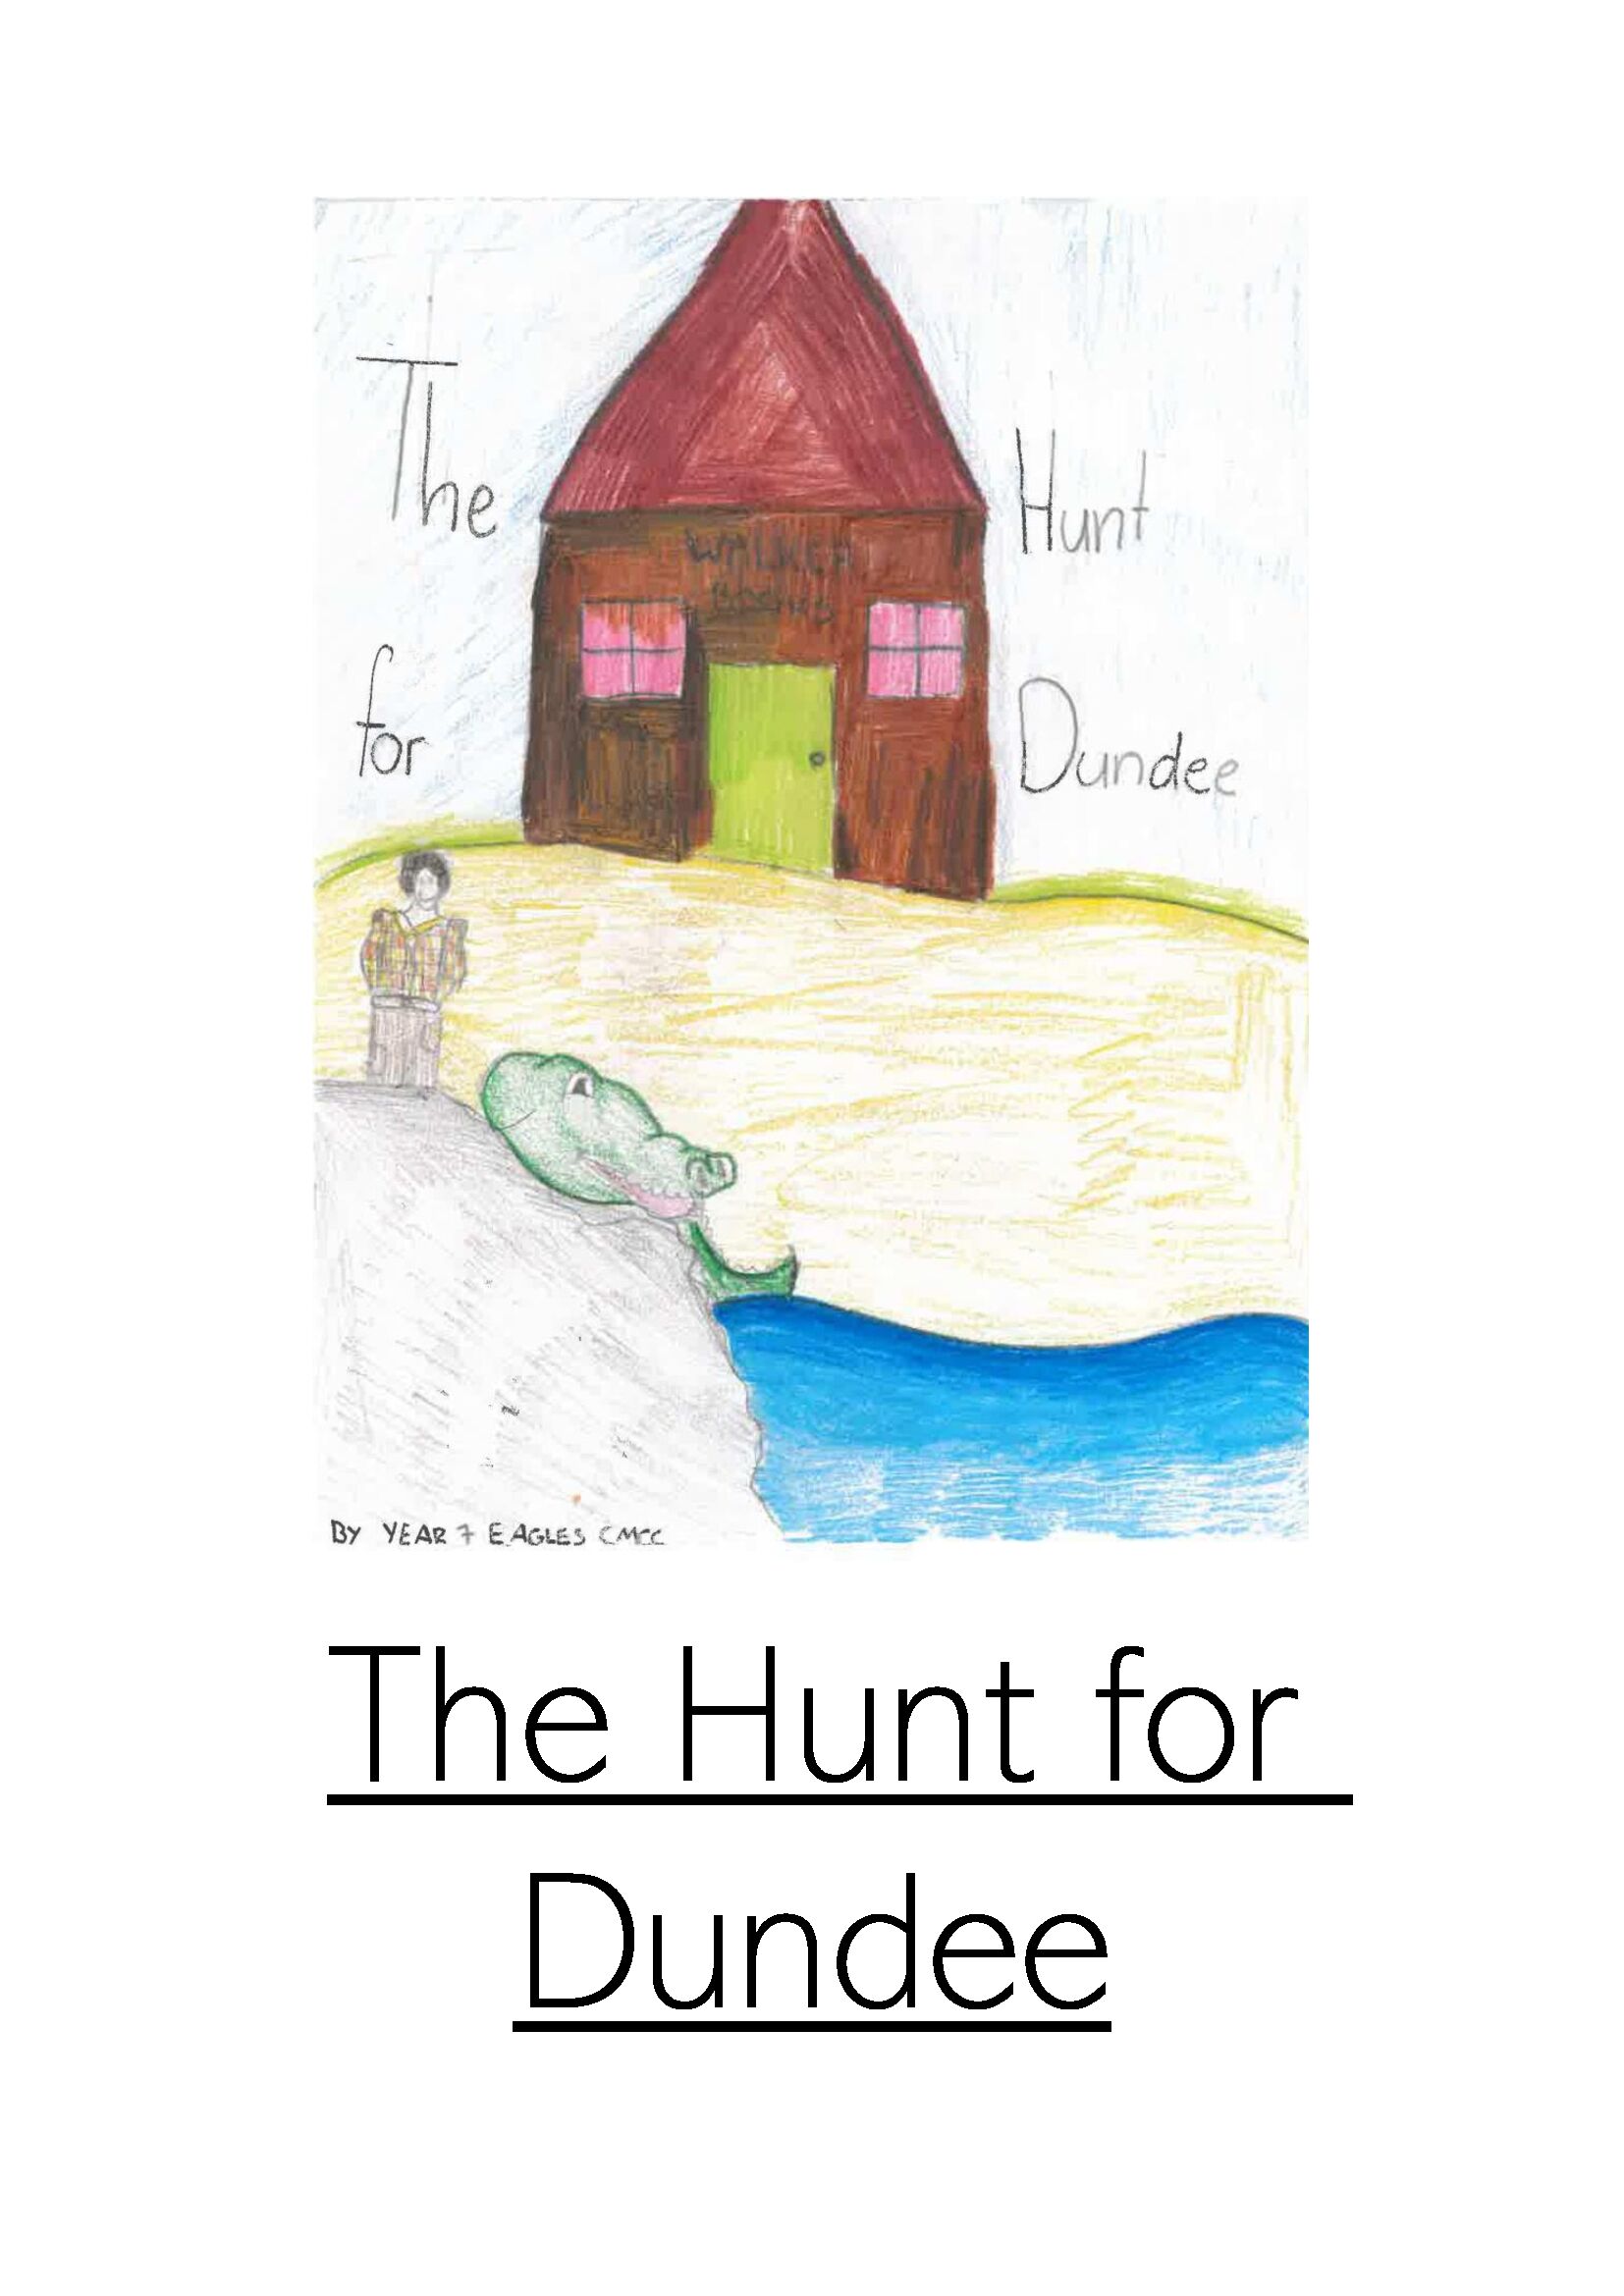 The Hunt for Dundee